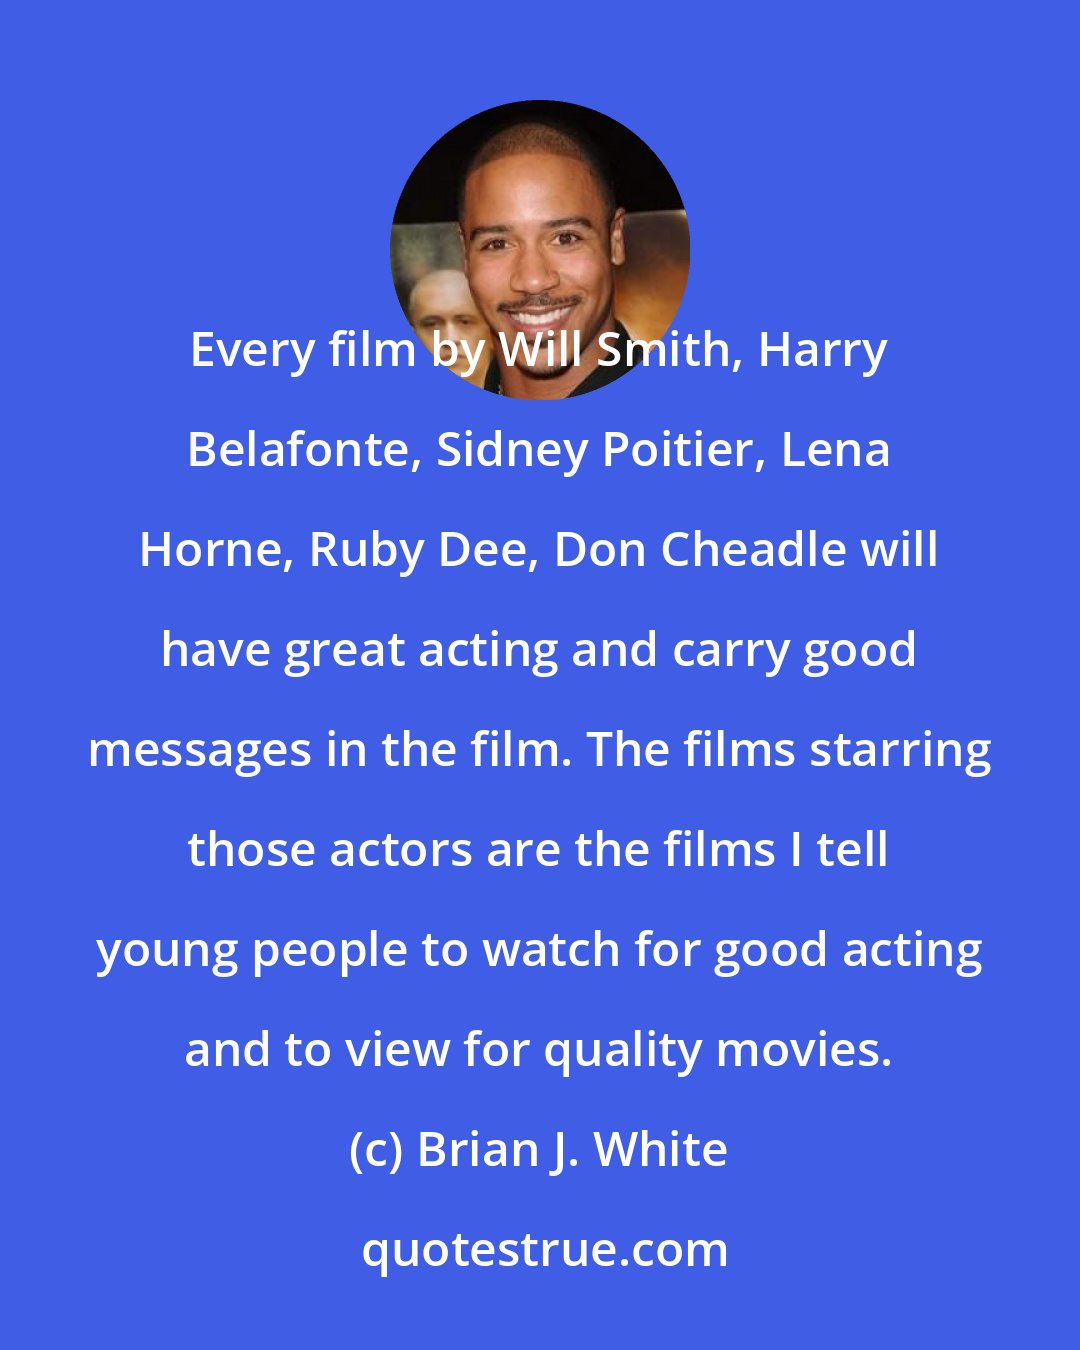 Brian J. White: Every film by Will Smith, Harry Belafonte, Sidney Poitier, Lena Horne, Ruby Dee, Don Cheadle will have great acting and carry good messages in the film. The films starring those actors are the films I tell young people to watch for good acting and to view for quality movies.